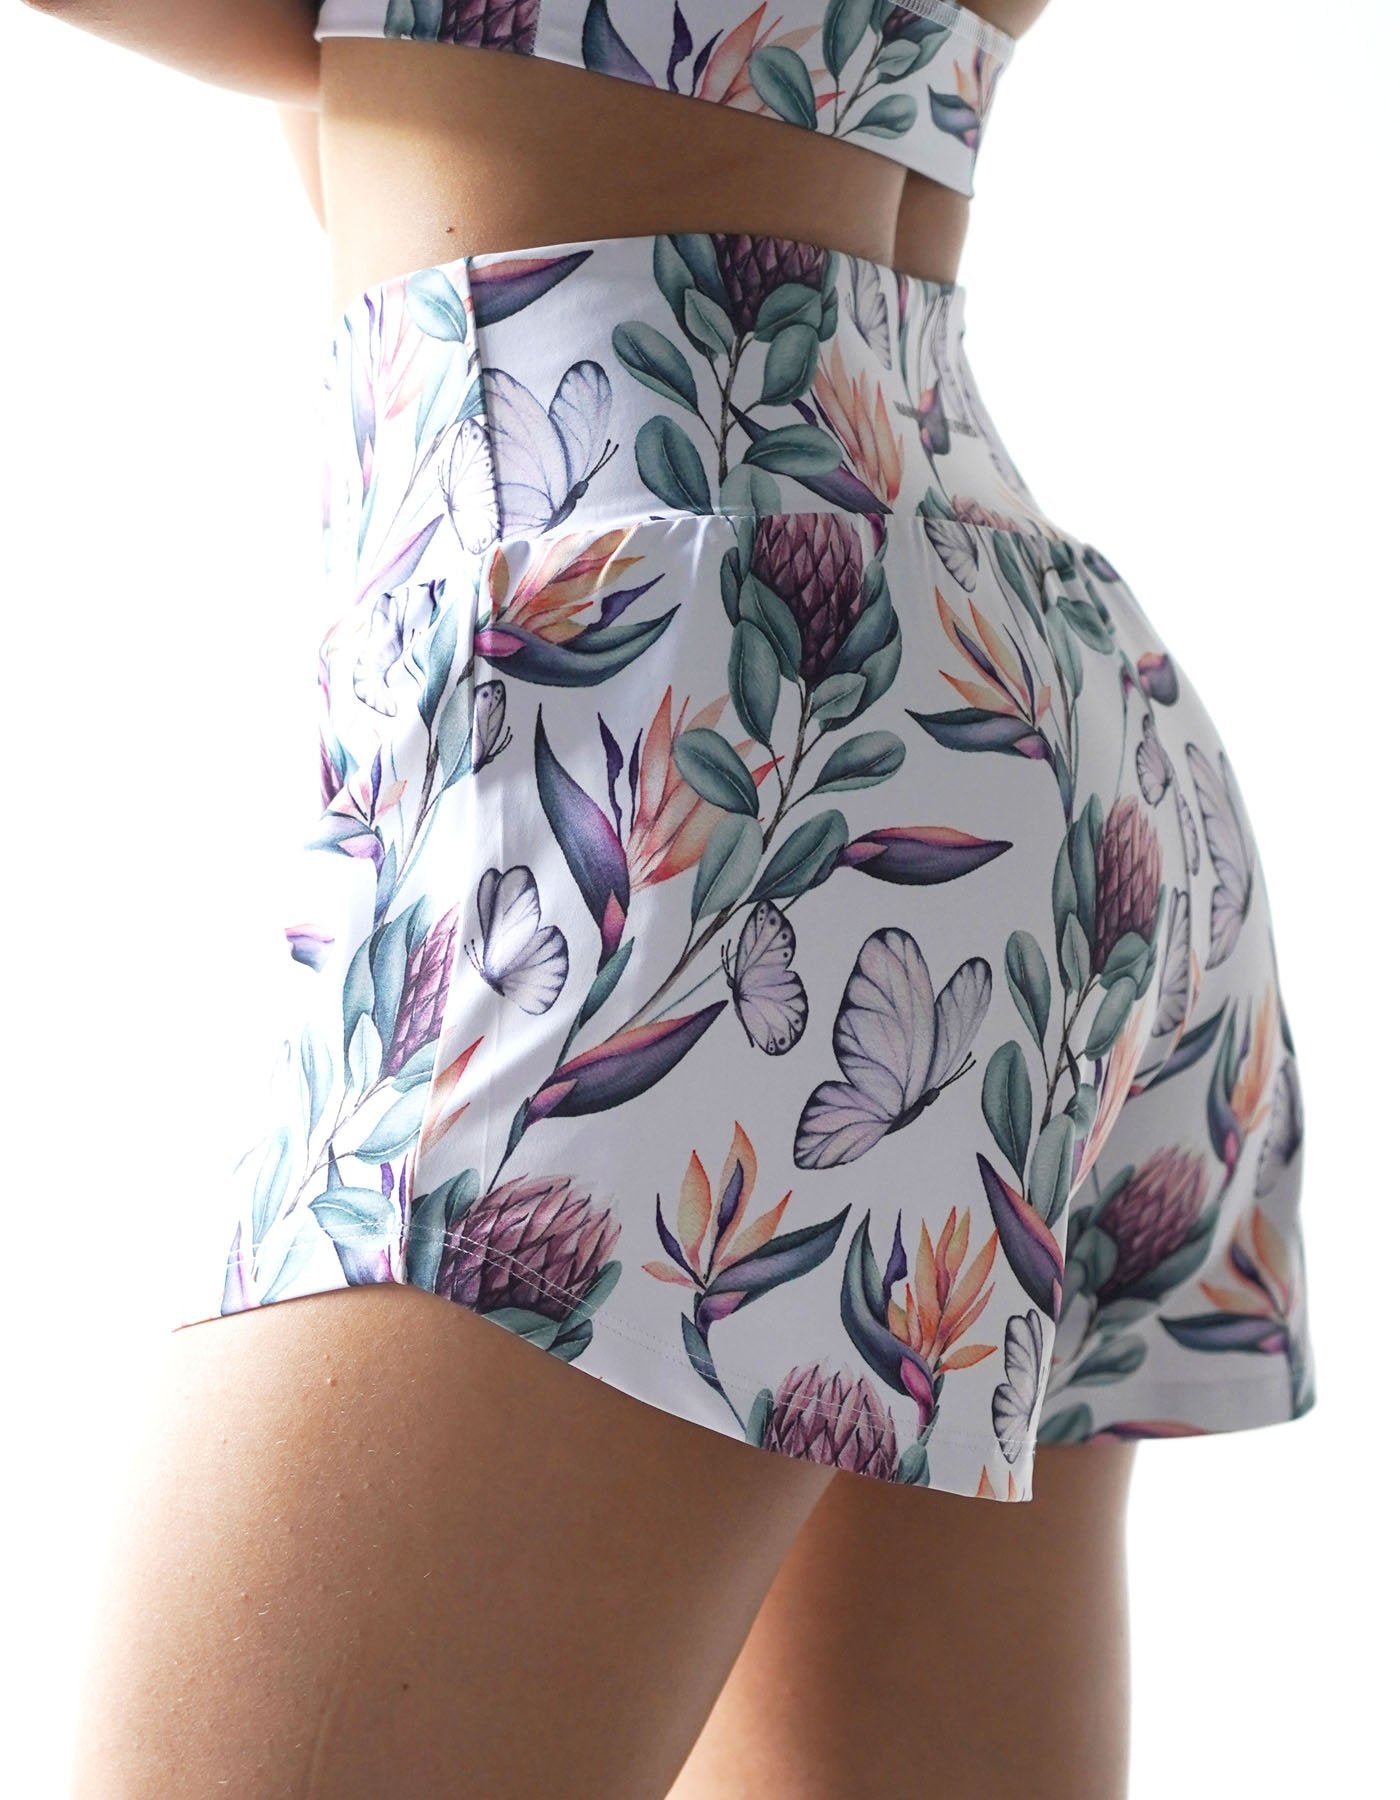 This is what dreams are made of. Crimson tavernorlando Island Dreams Runner shorts with the beautiful Island Dreams prints that have flowers & butterflies. 